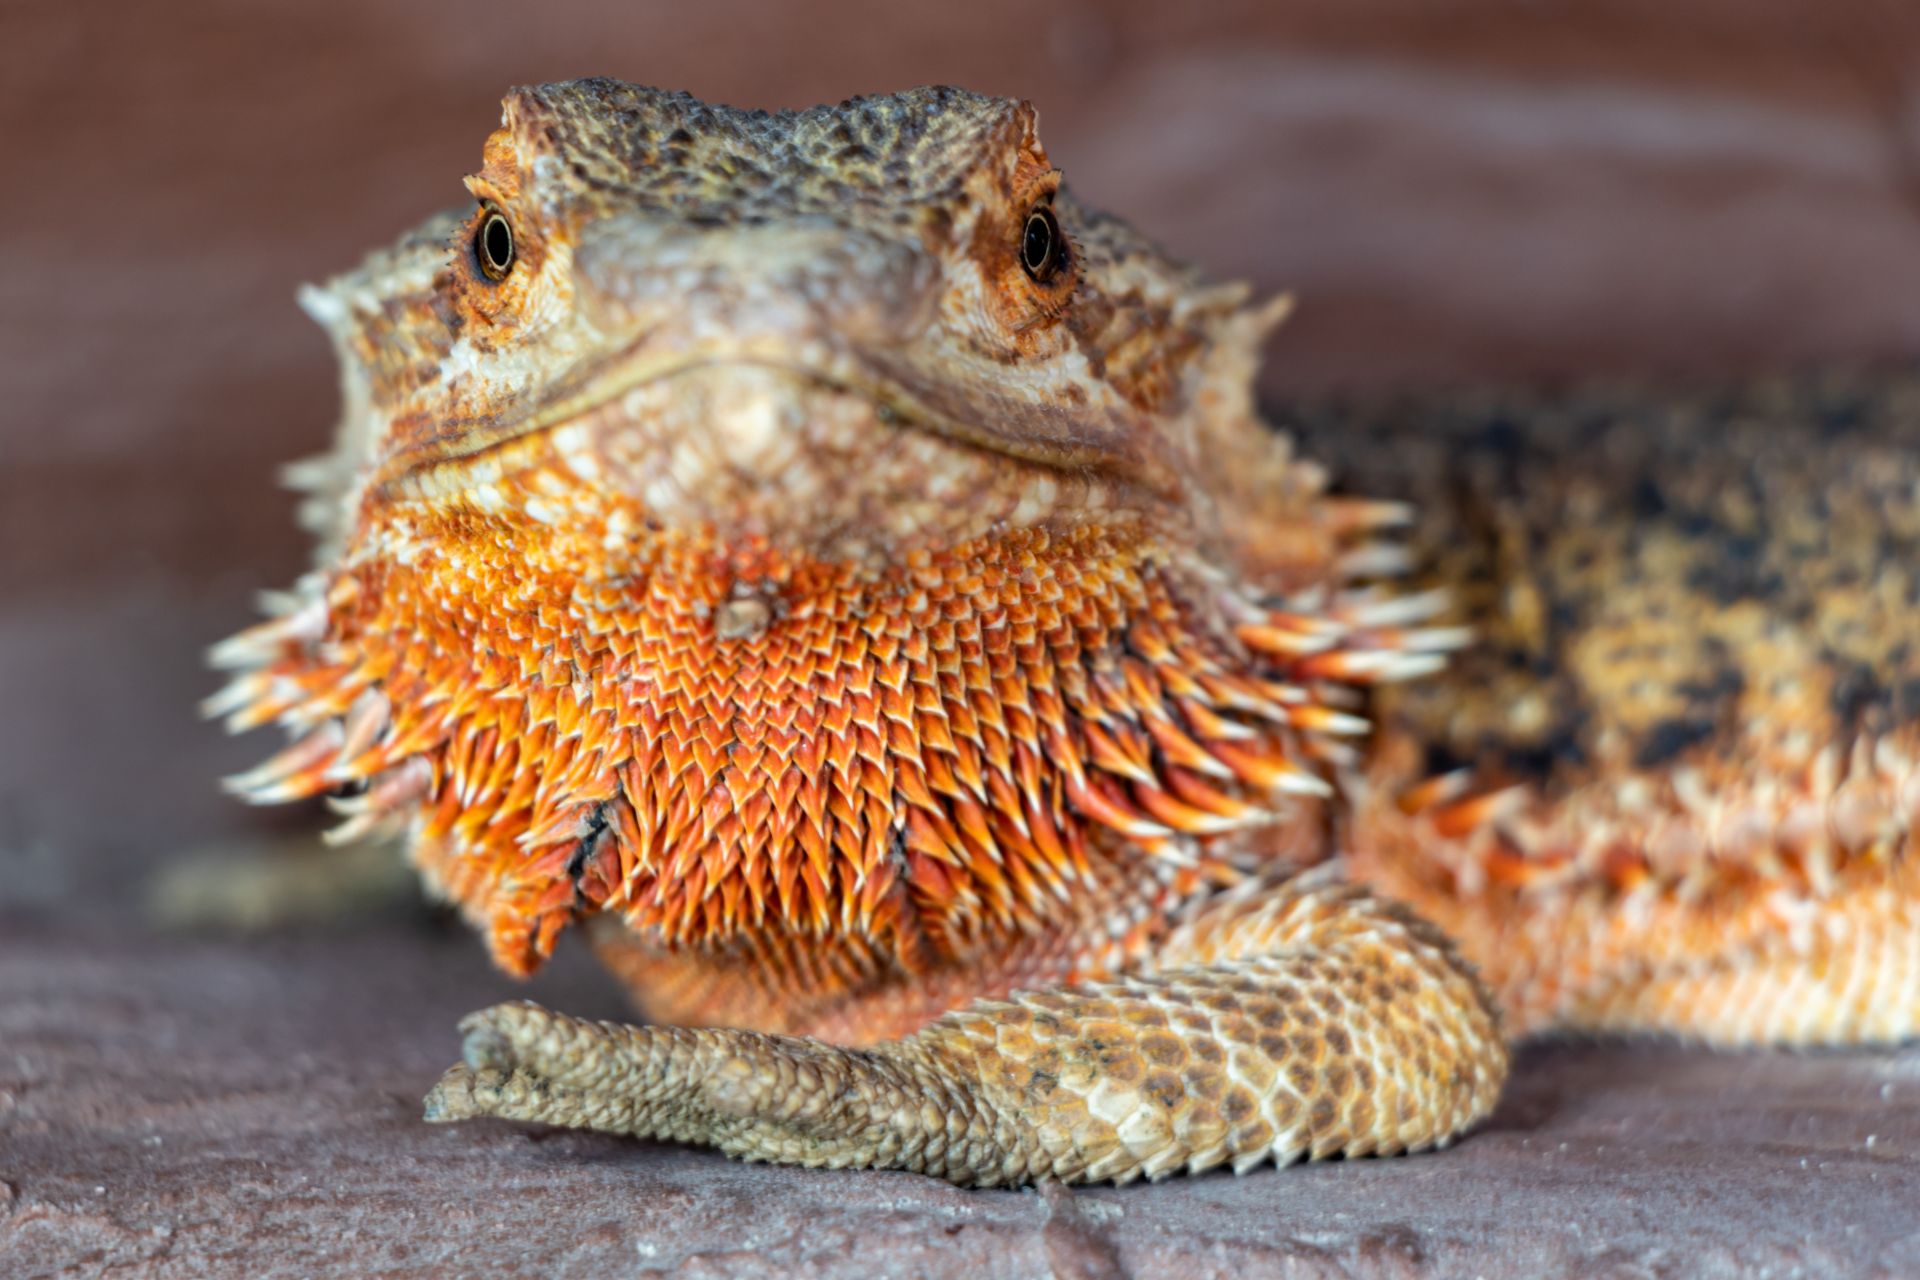 What Do Bearded Dragons Eat? Complete Food & Nutrition Guide